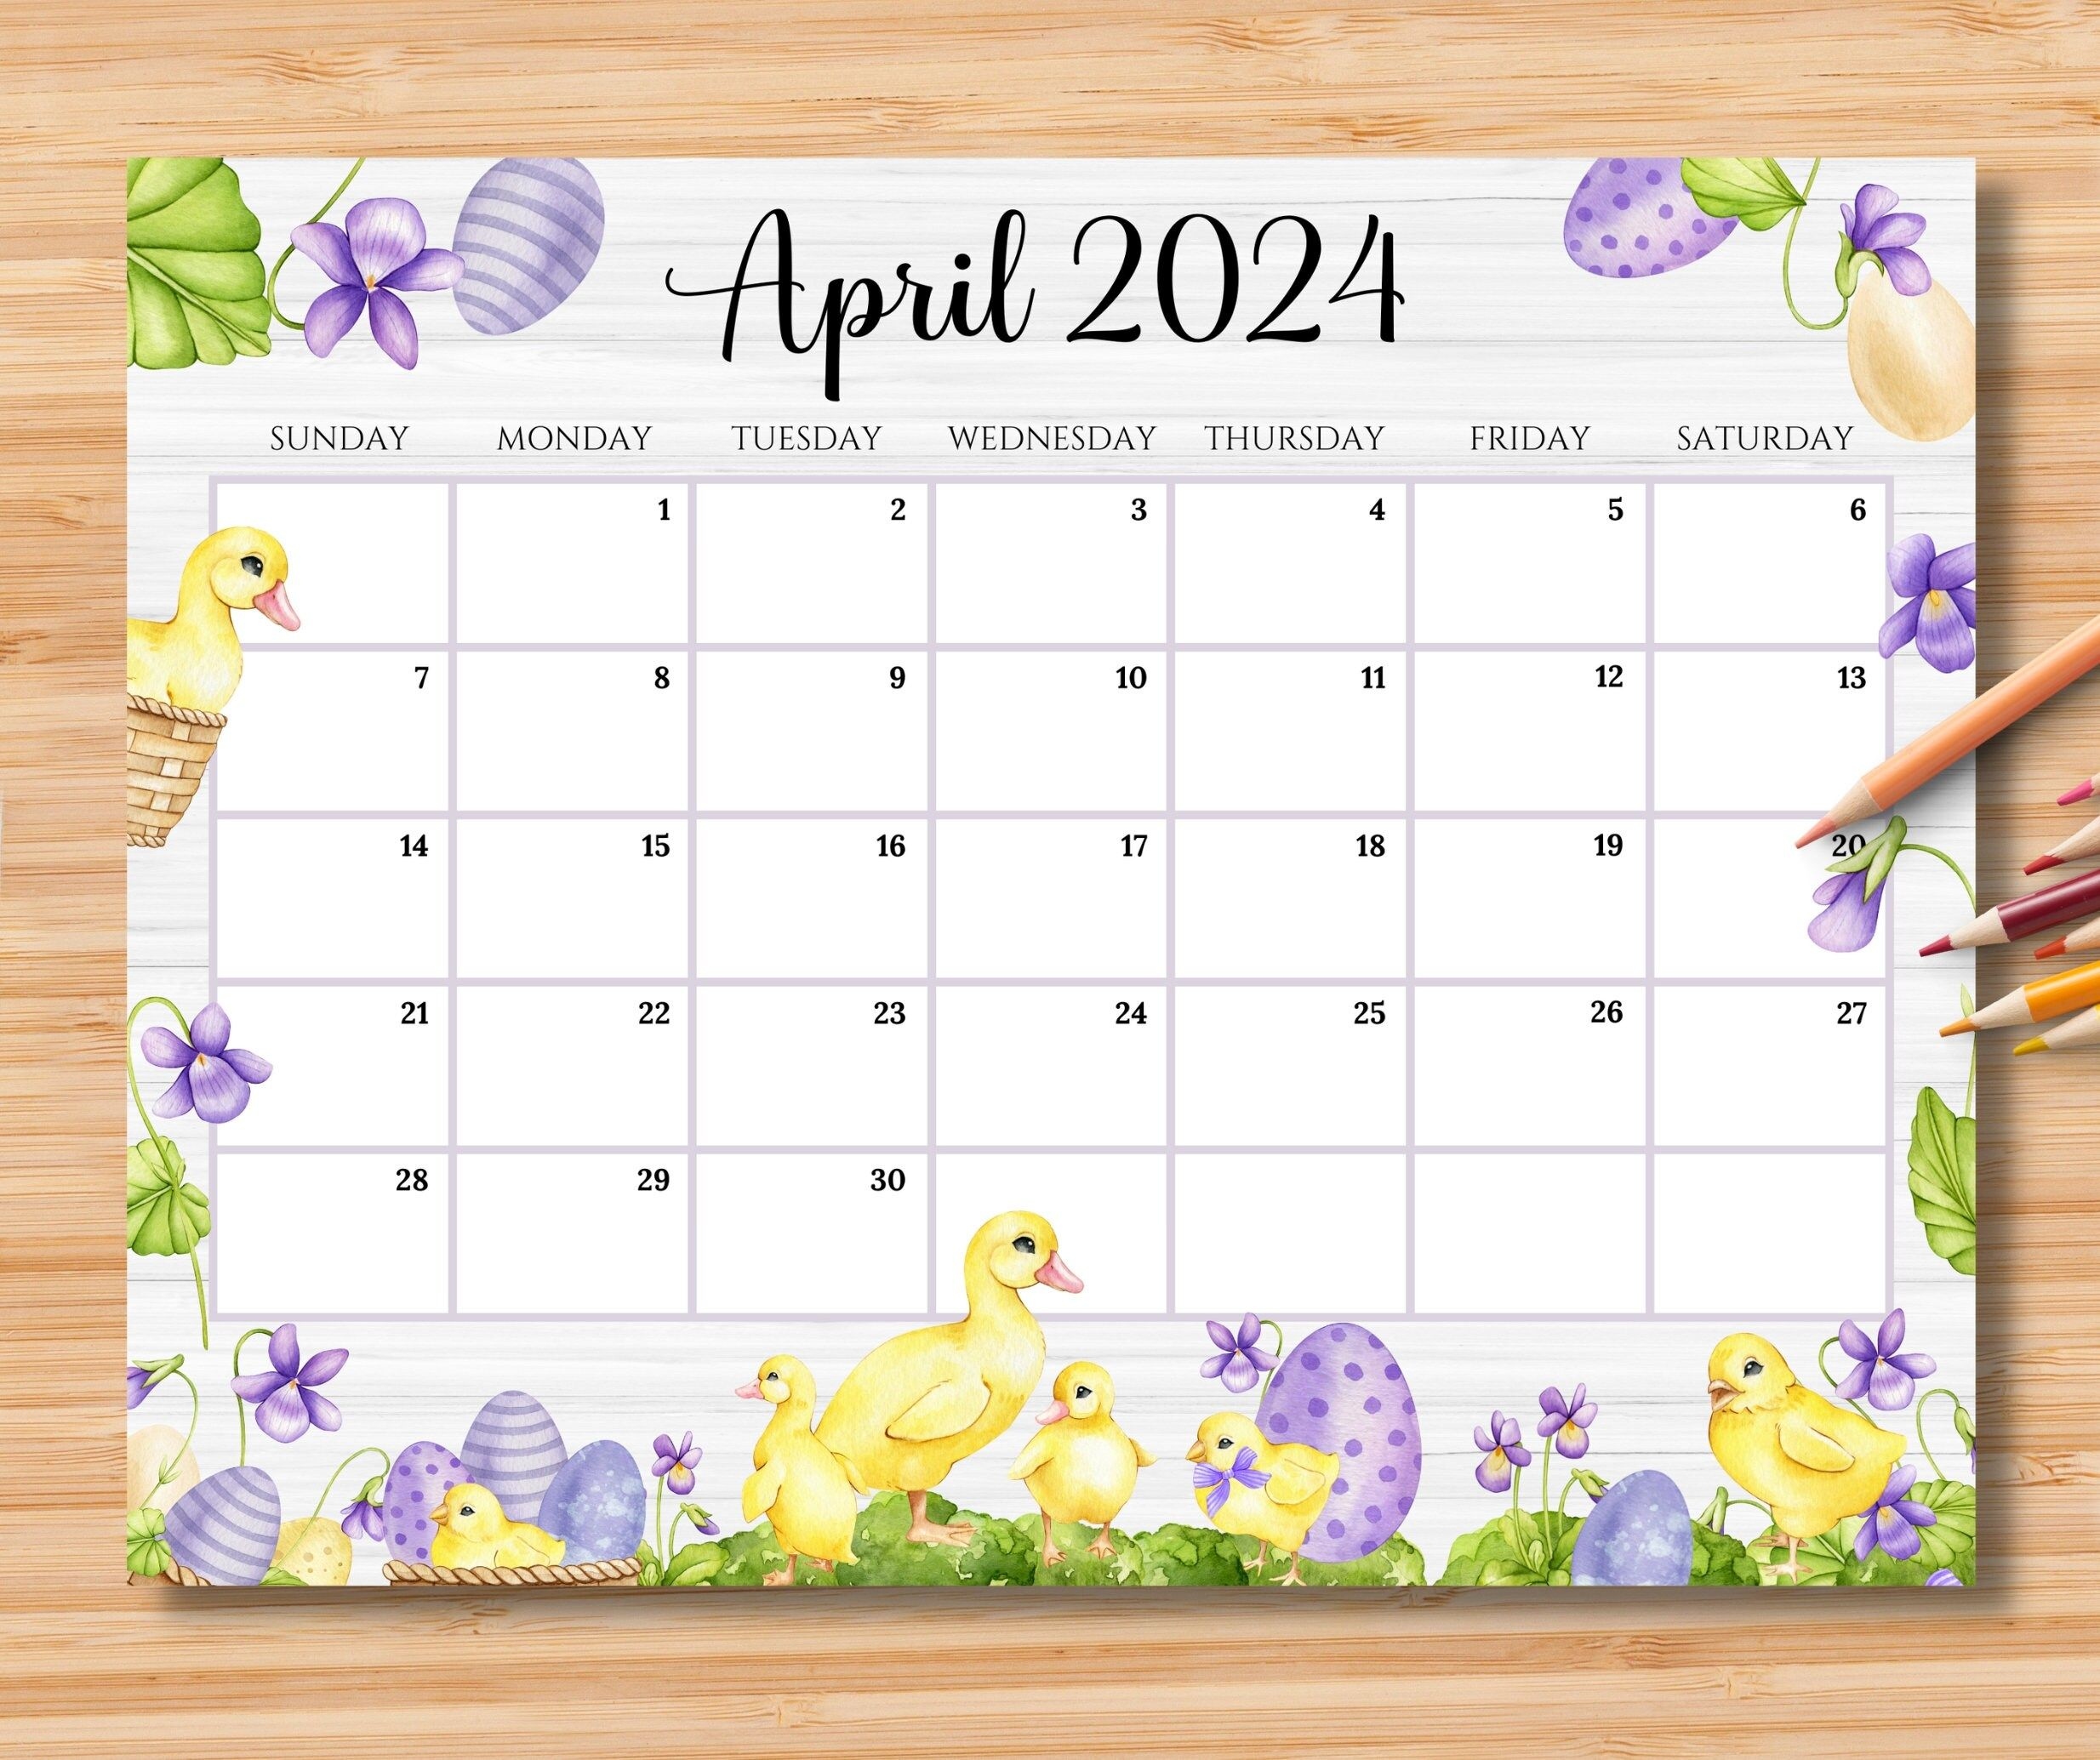 Editable April 2024 Calendar Happy Easter Day With Cute Ducks intended for Free Printable April 2024 Easter Calendar